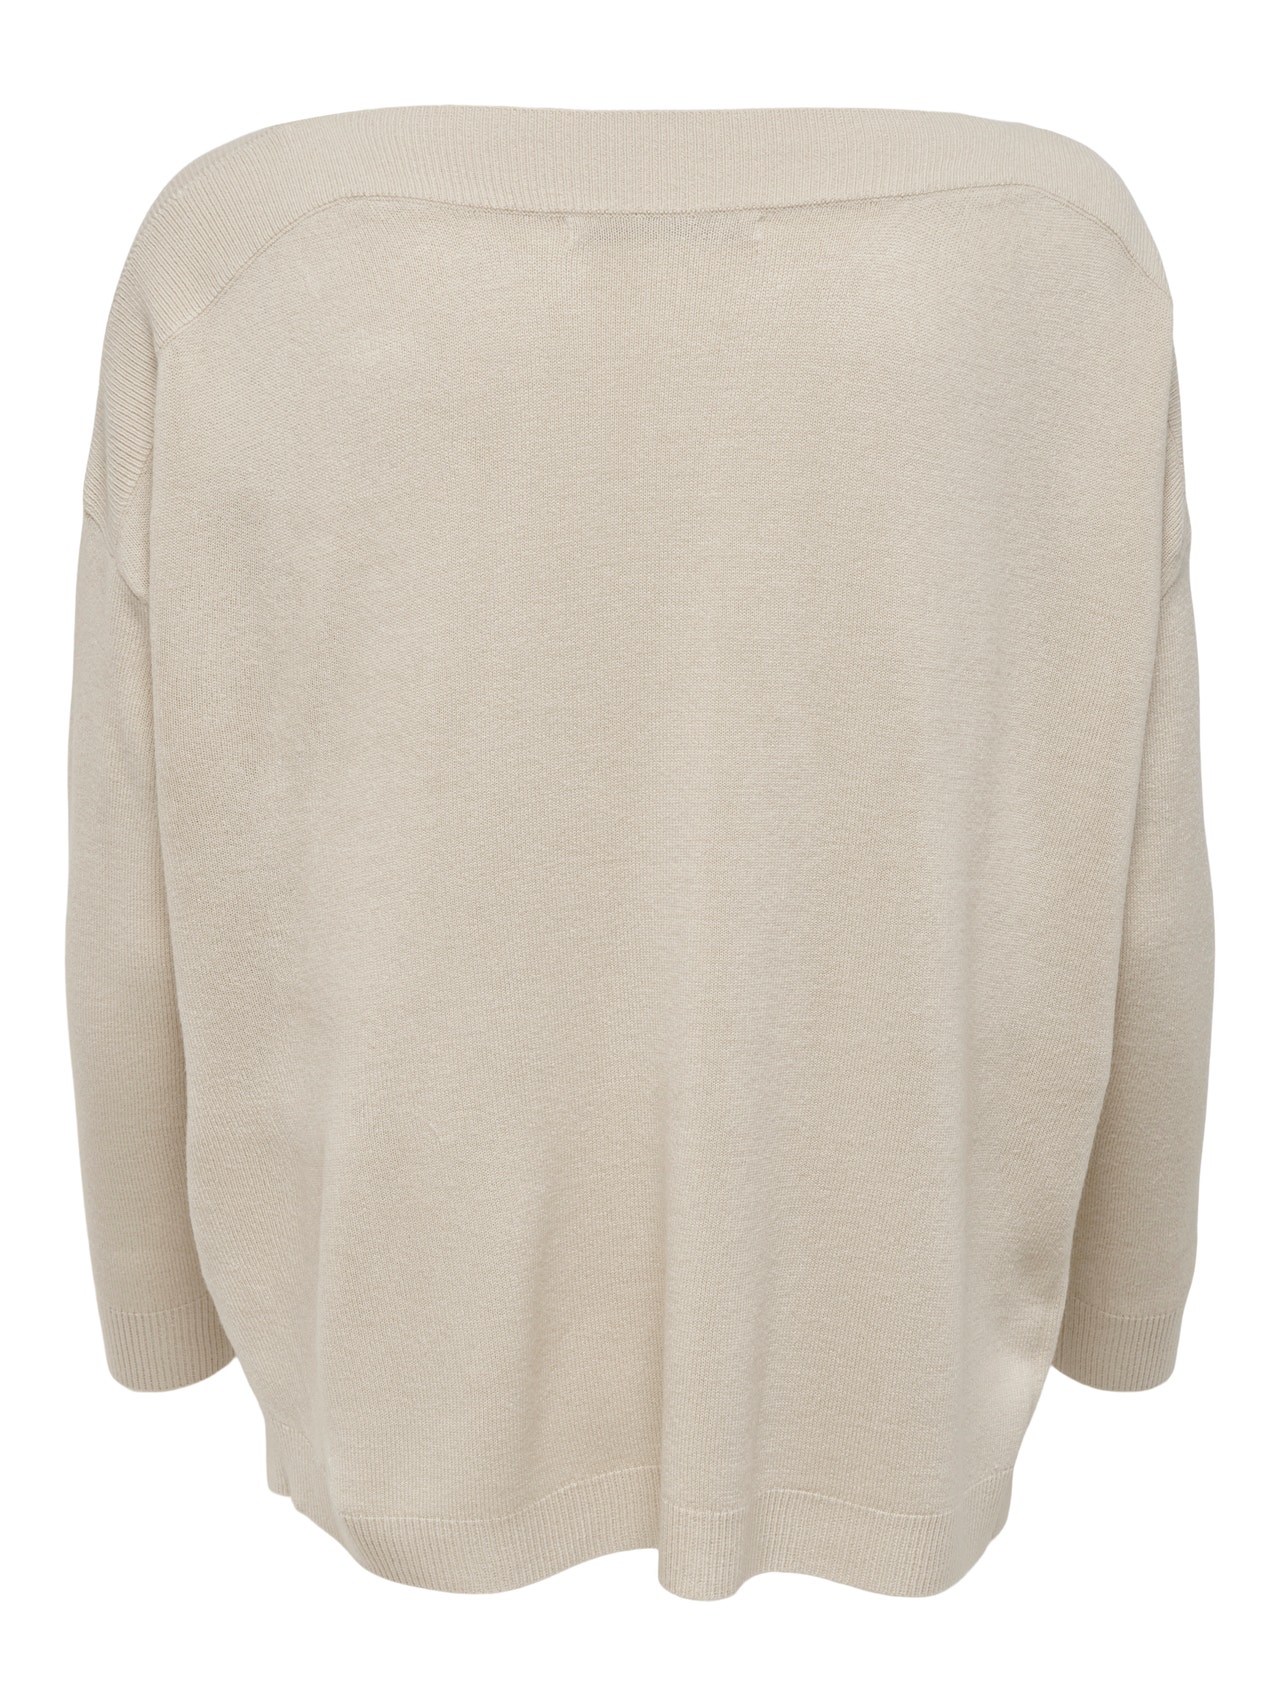 ONLY Tall Boatneck knitted pullover -Pumice Stone - 15276563